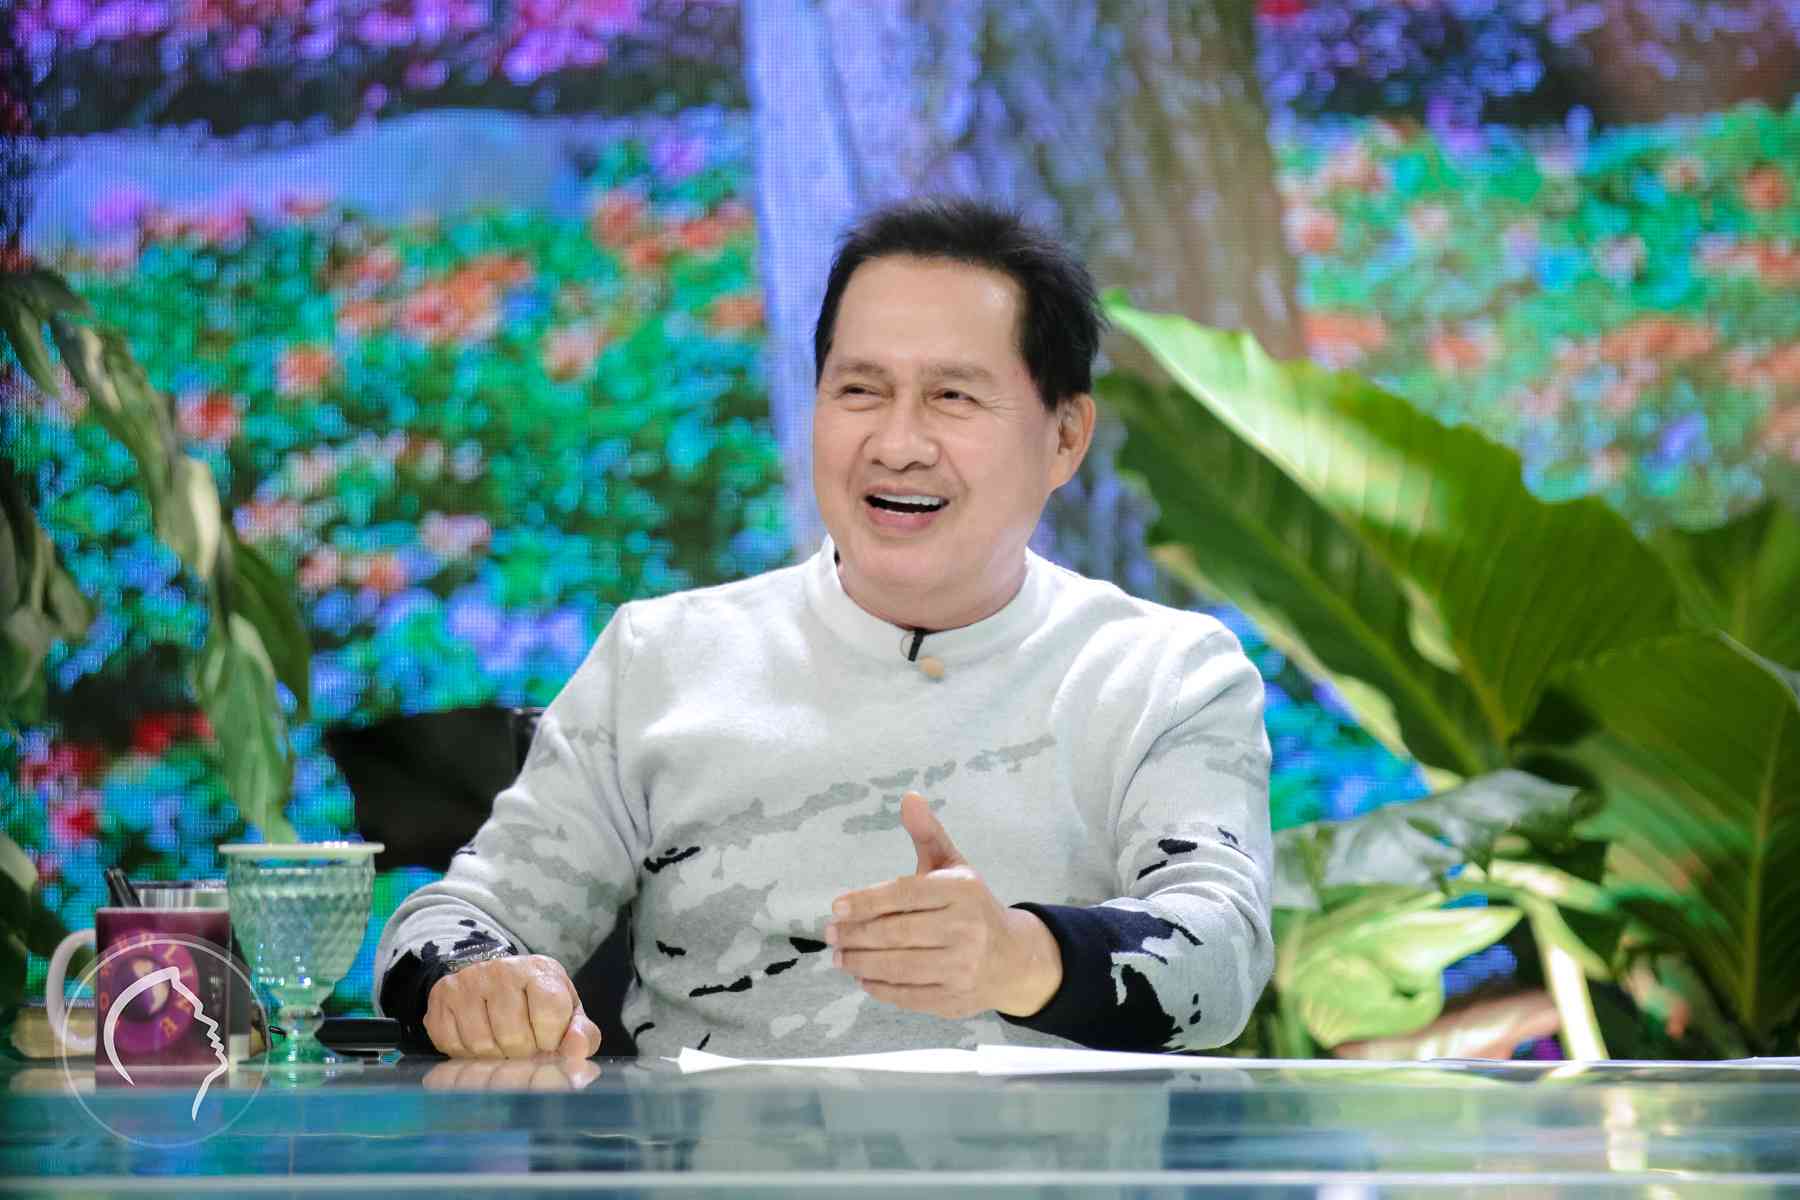 Quiboloy will not surrender at this time - lawyer